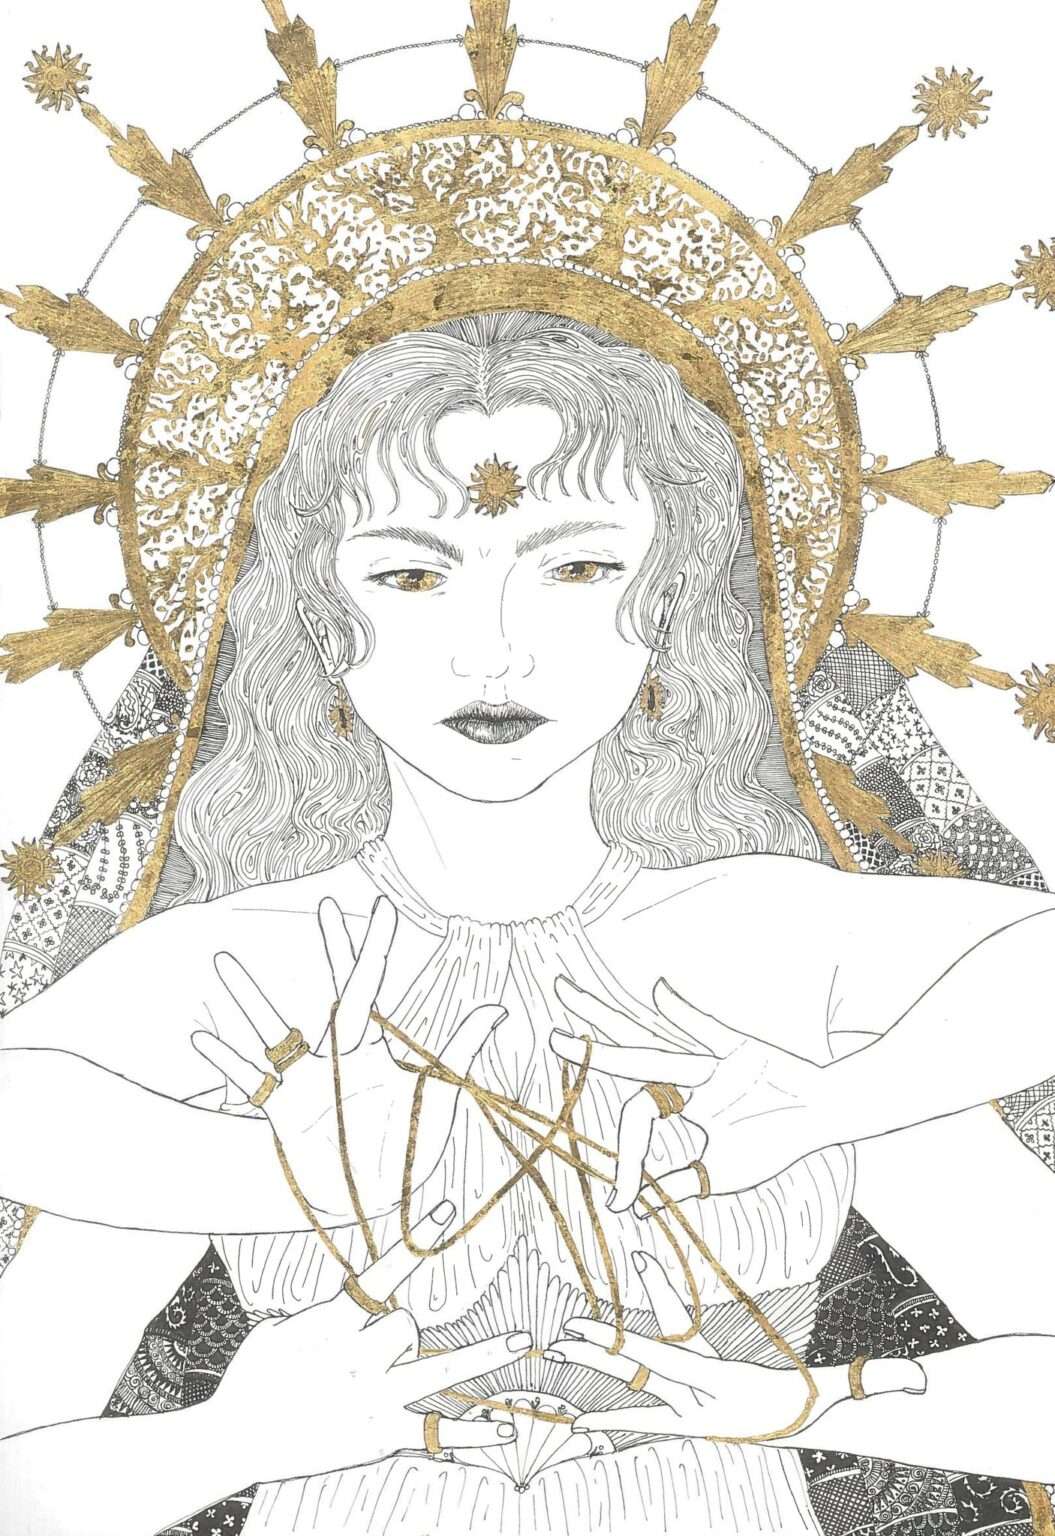 Jenni Coutt's BFS cover image - a divine female being with multiple arms and an intricate golden stellate halo weaves a cat's cradle of golden threads.